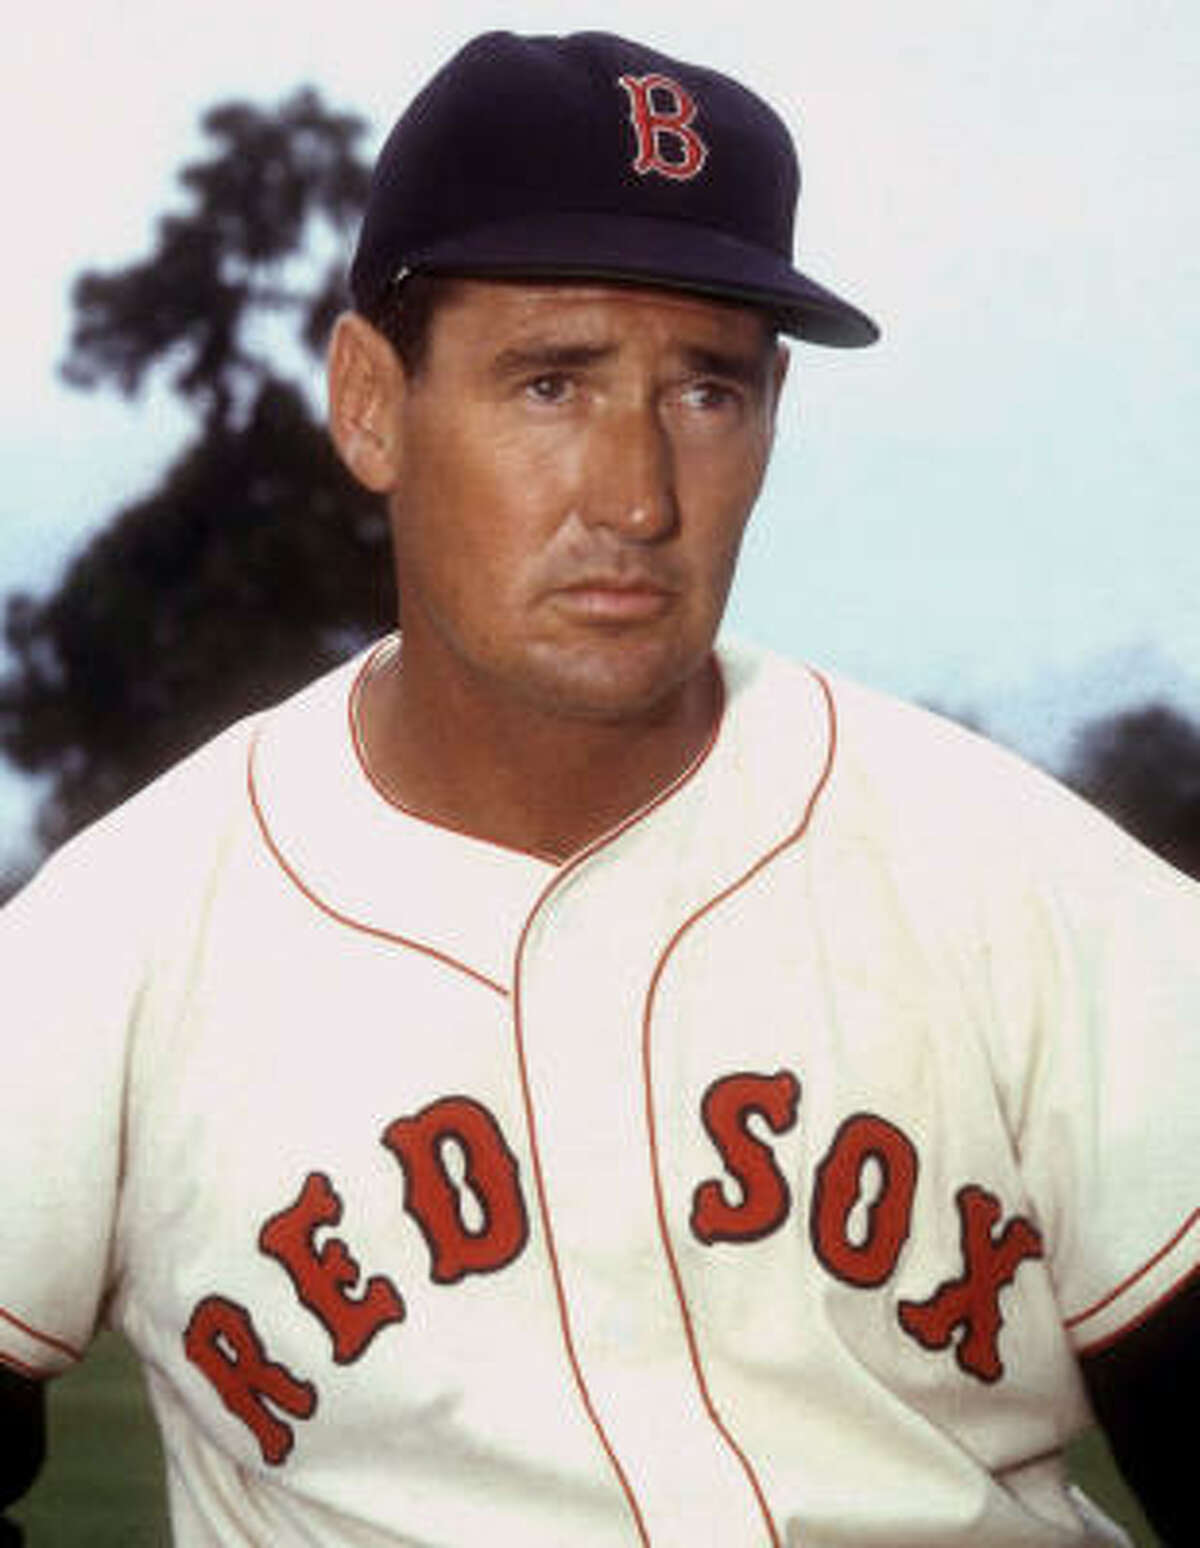 Boston Red Sox outfielder Ted Williams is baseball’s last .400 hitter and the subject of a new documentary on HBO.